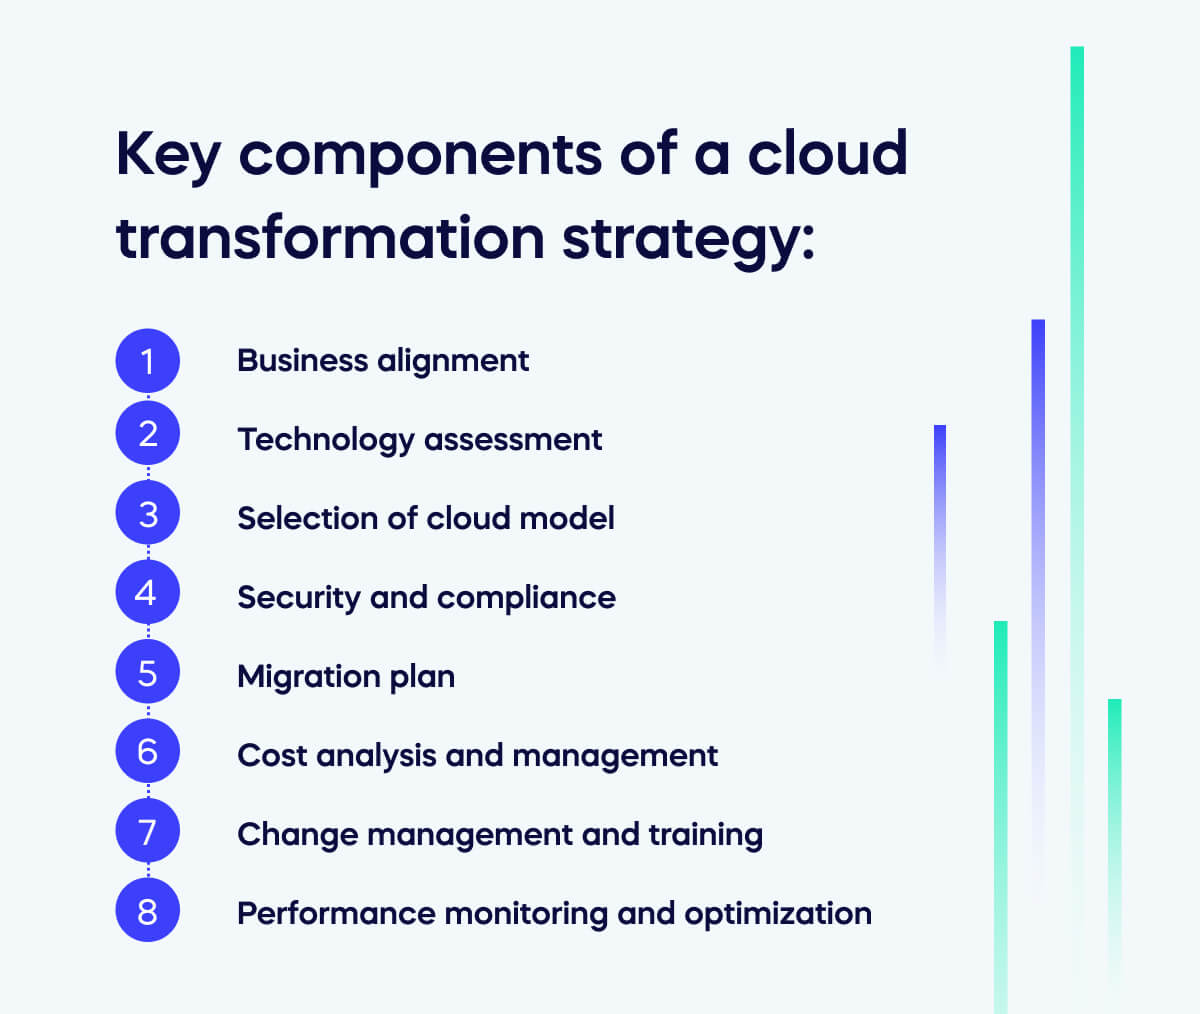 Key components of a cloud transformation strategy